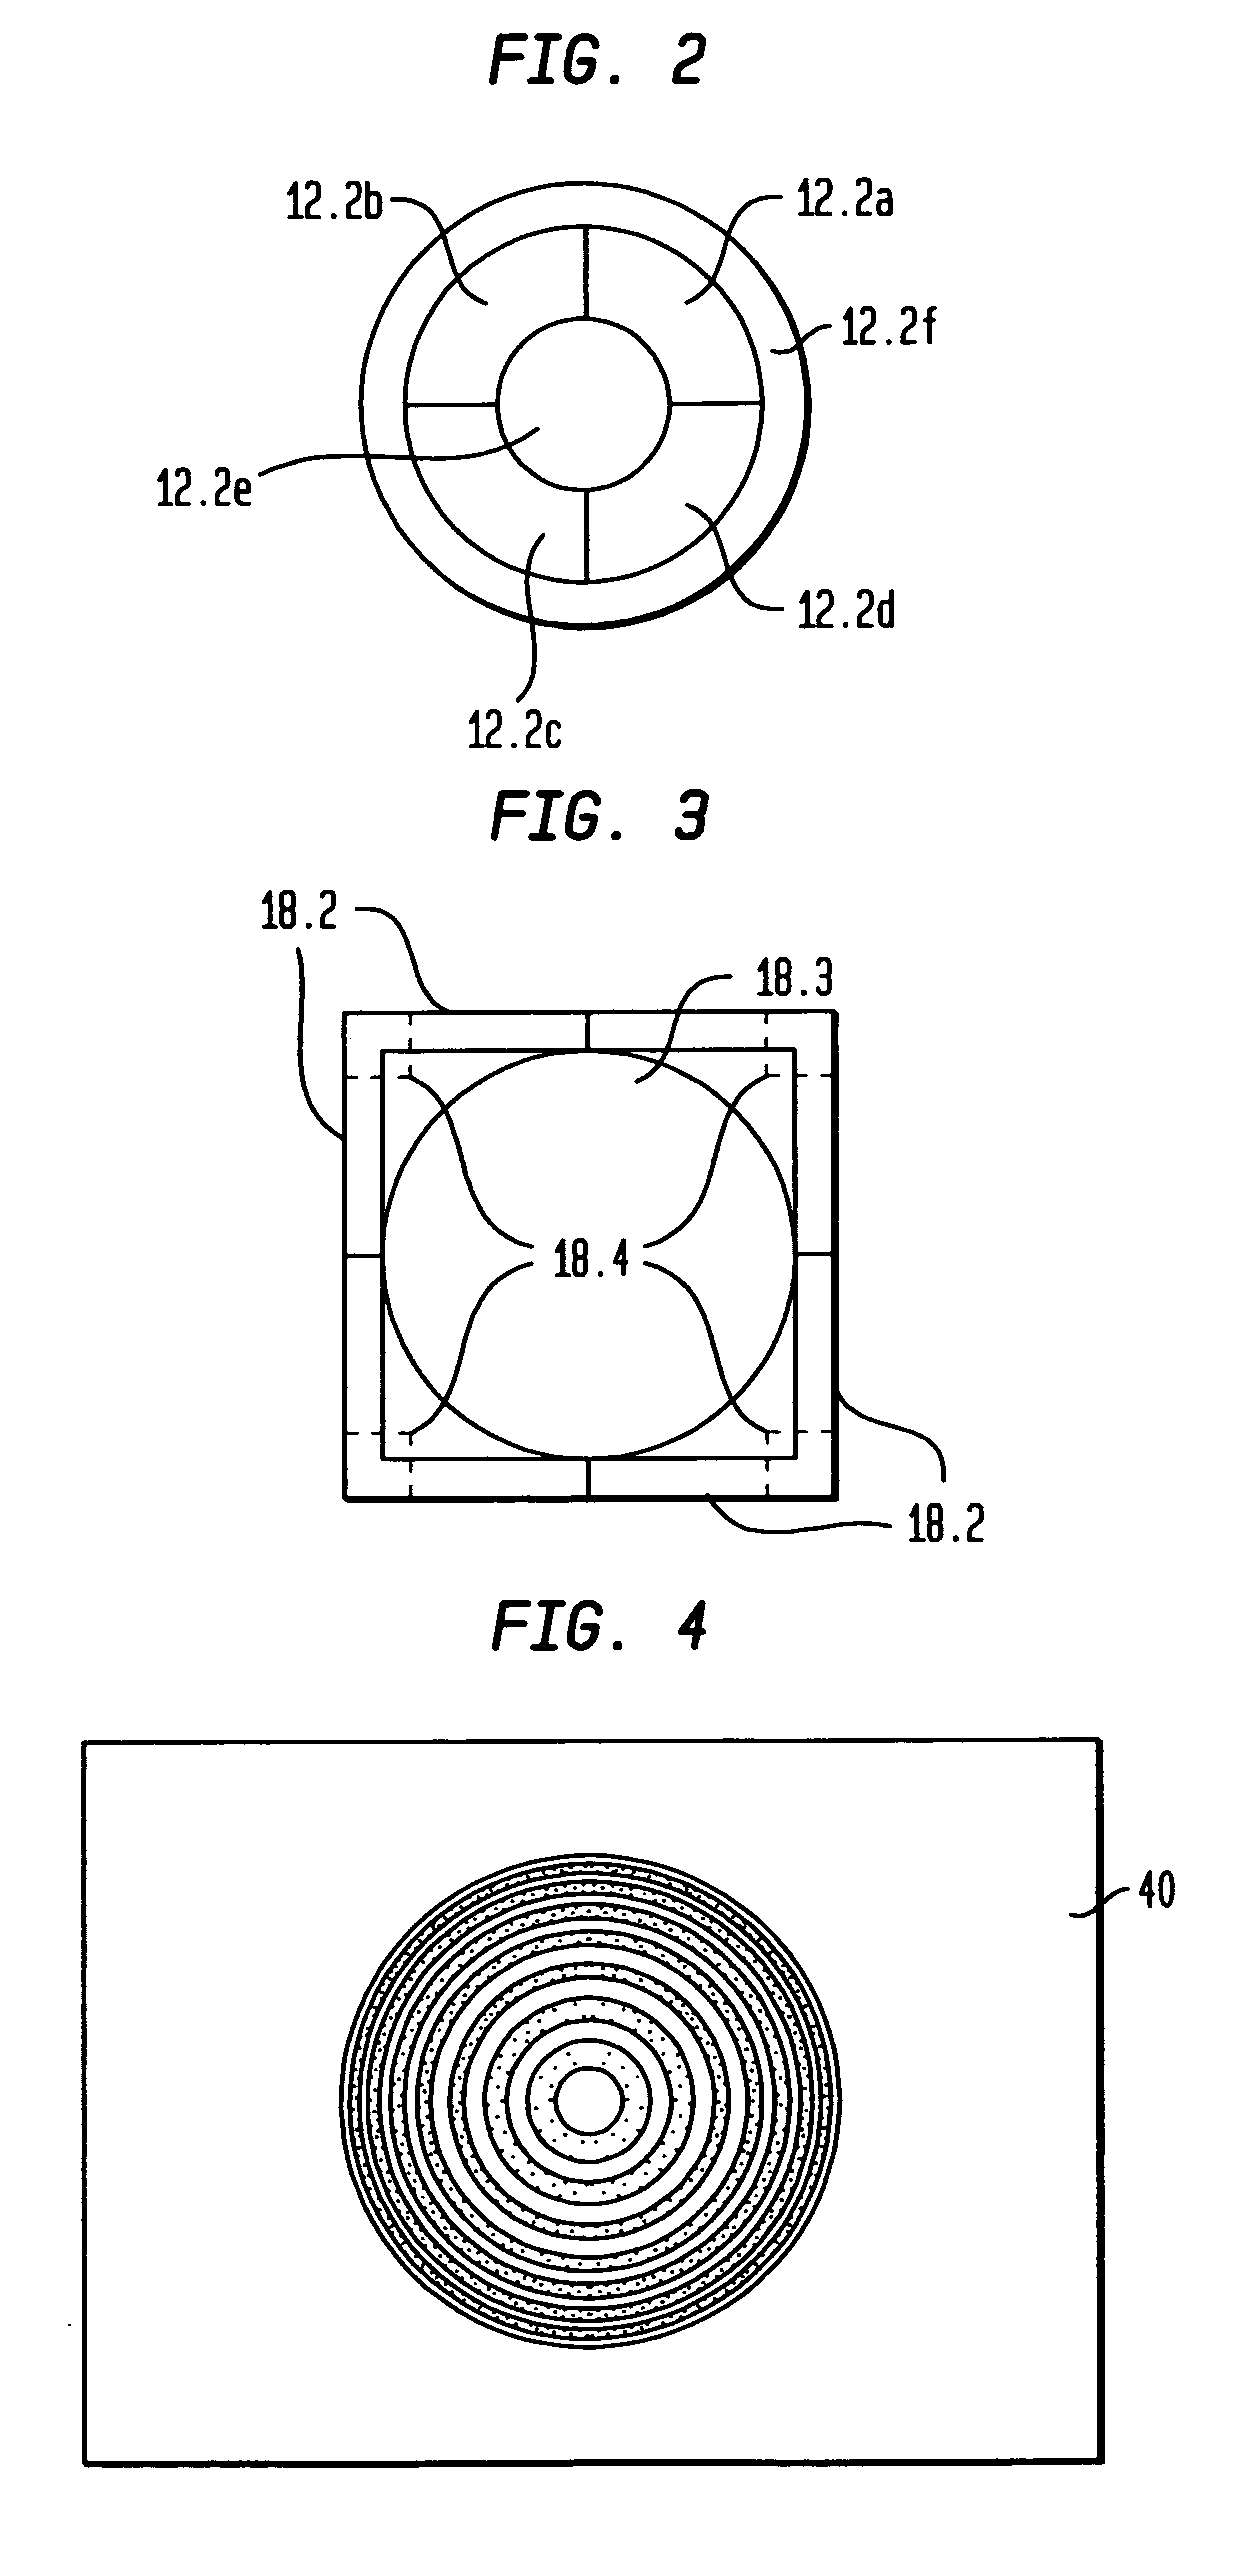 Focusable and steerable micro-miniature x-ray apparatus